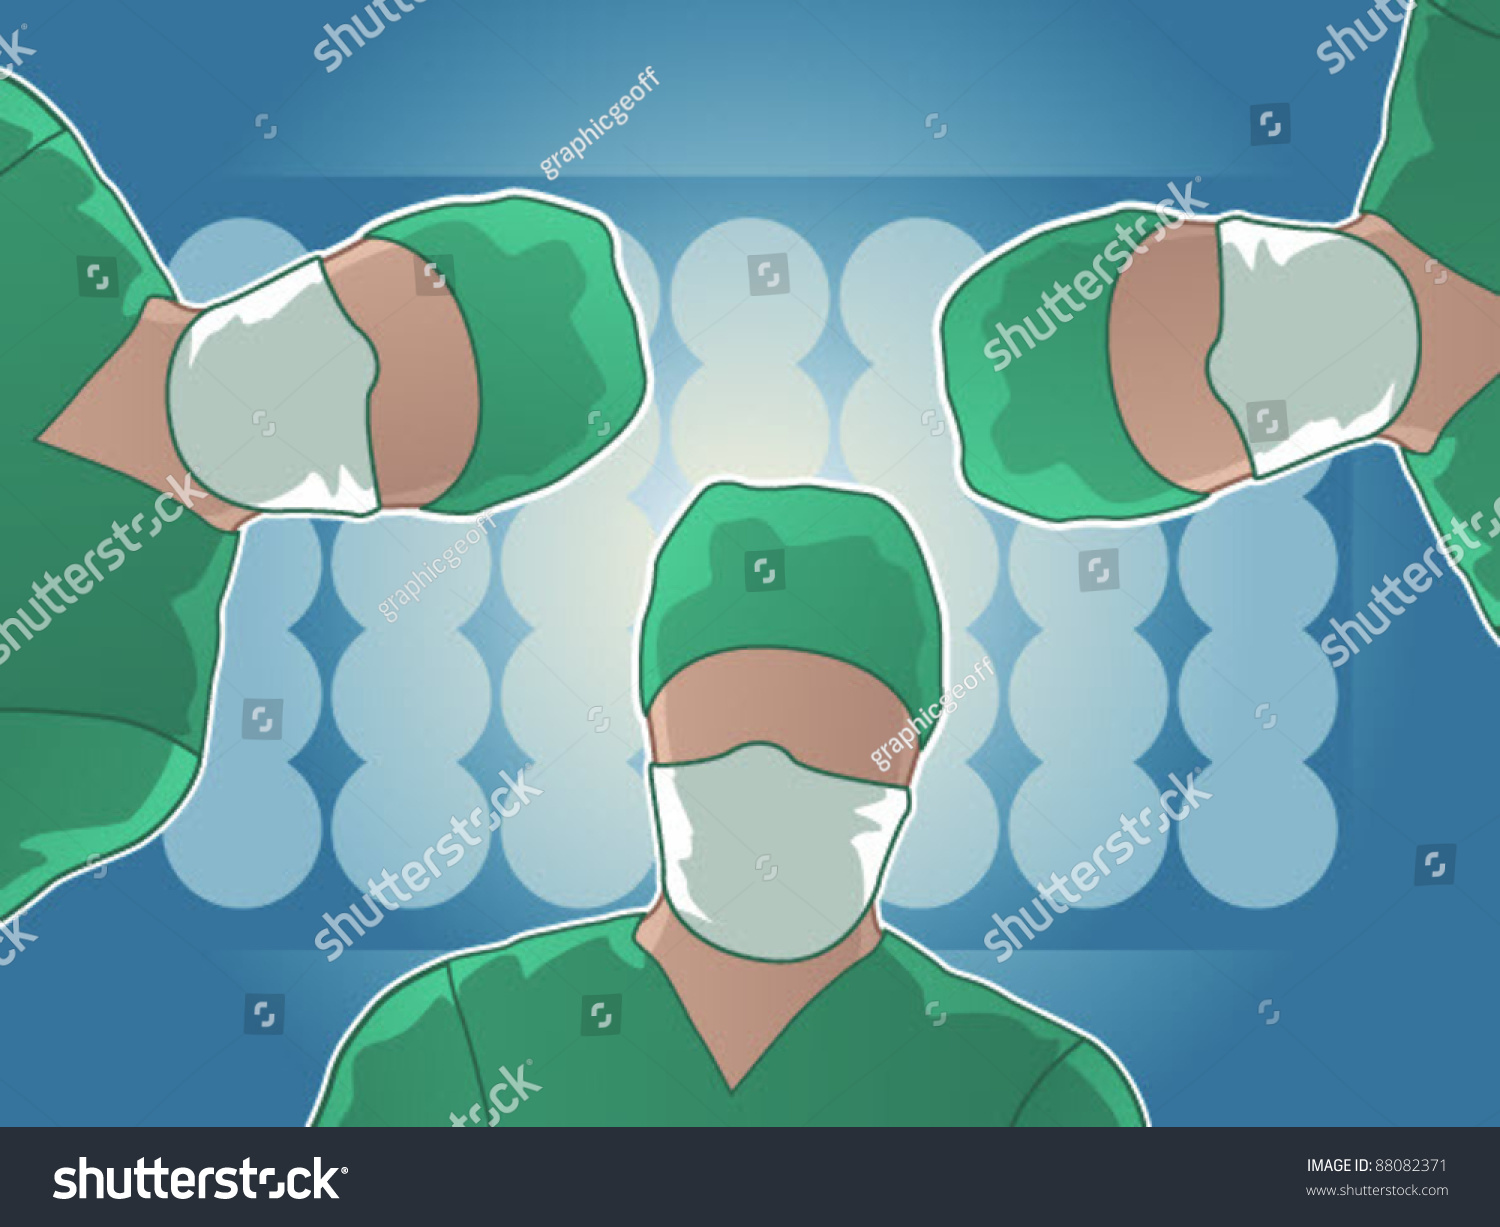 operating room clipart free - photo #44